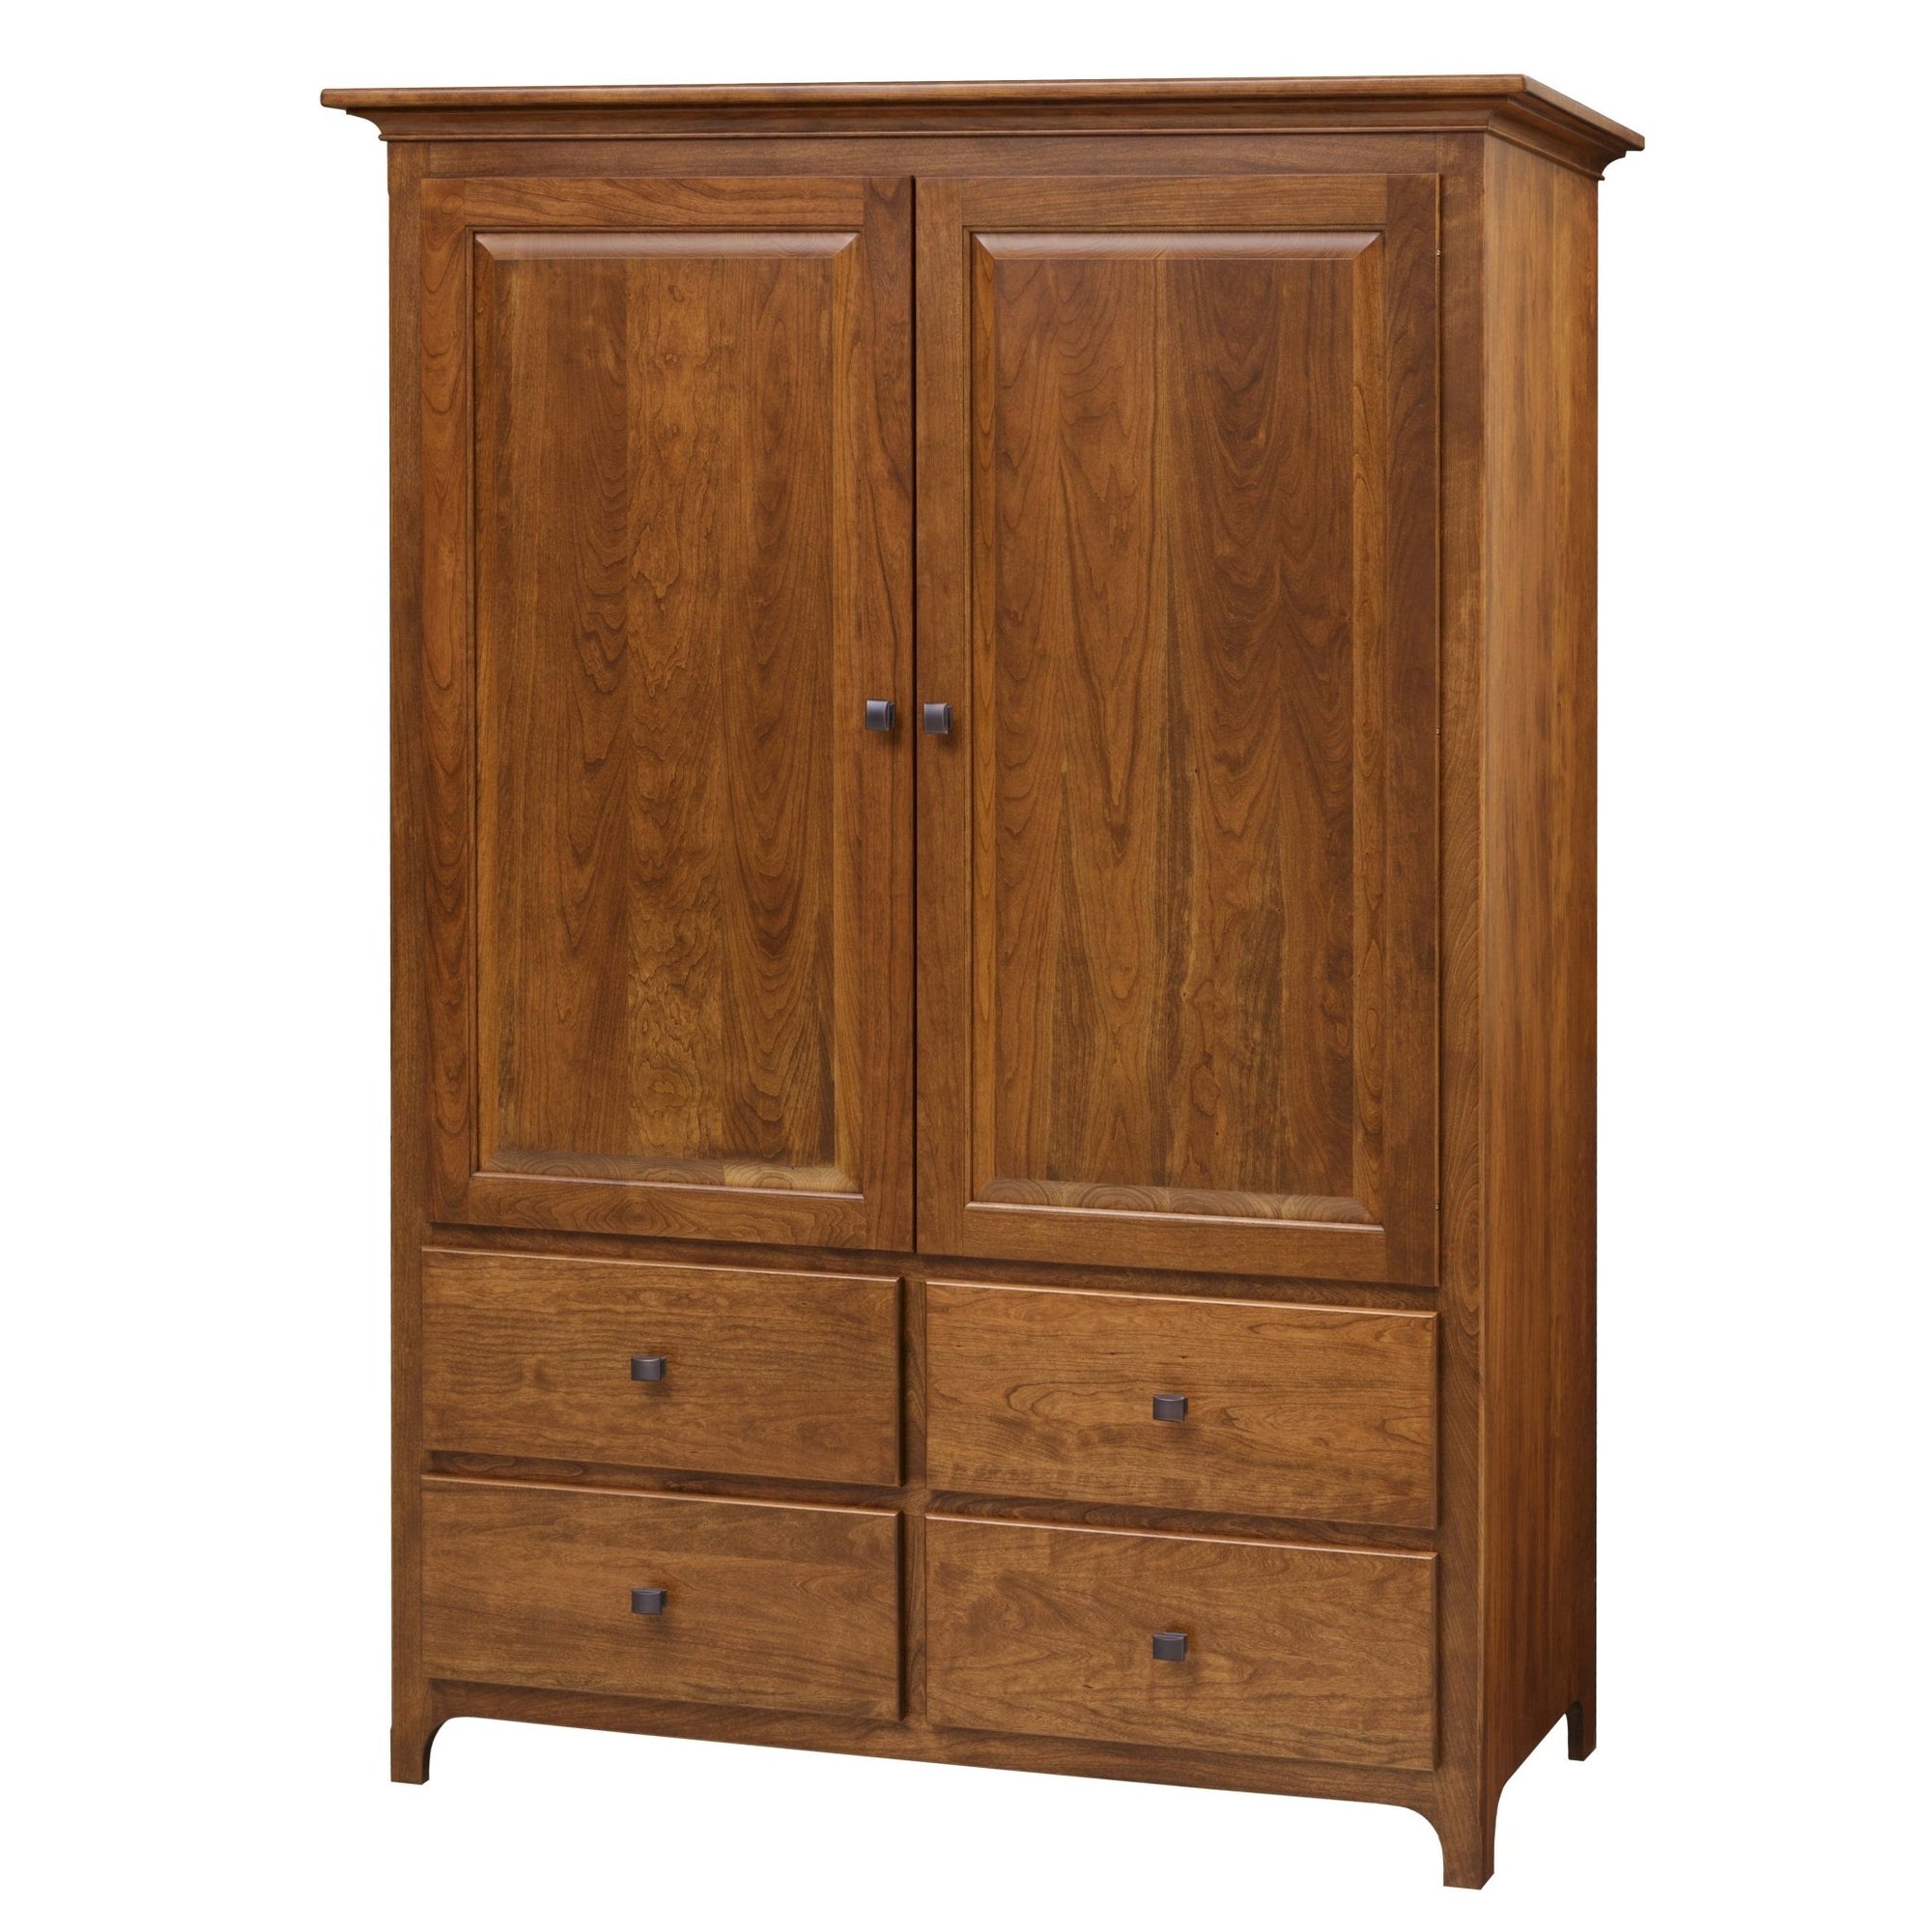 Plymouth Wardrobe - snyders.furniture